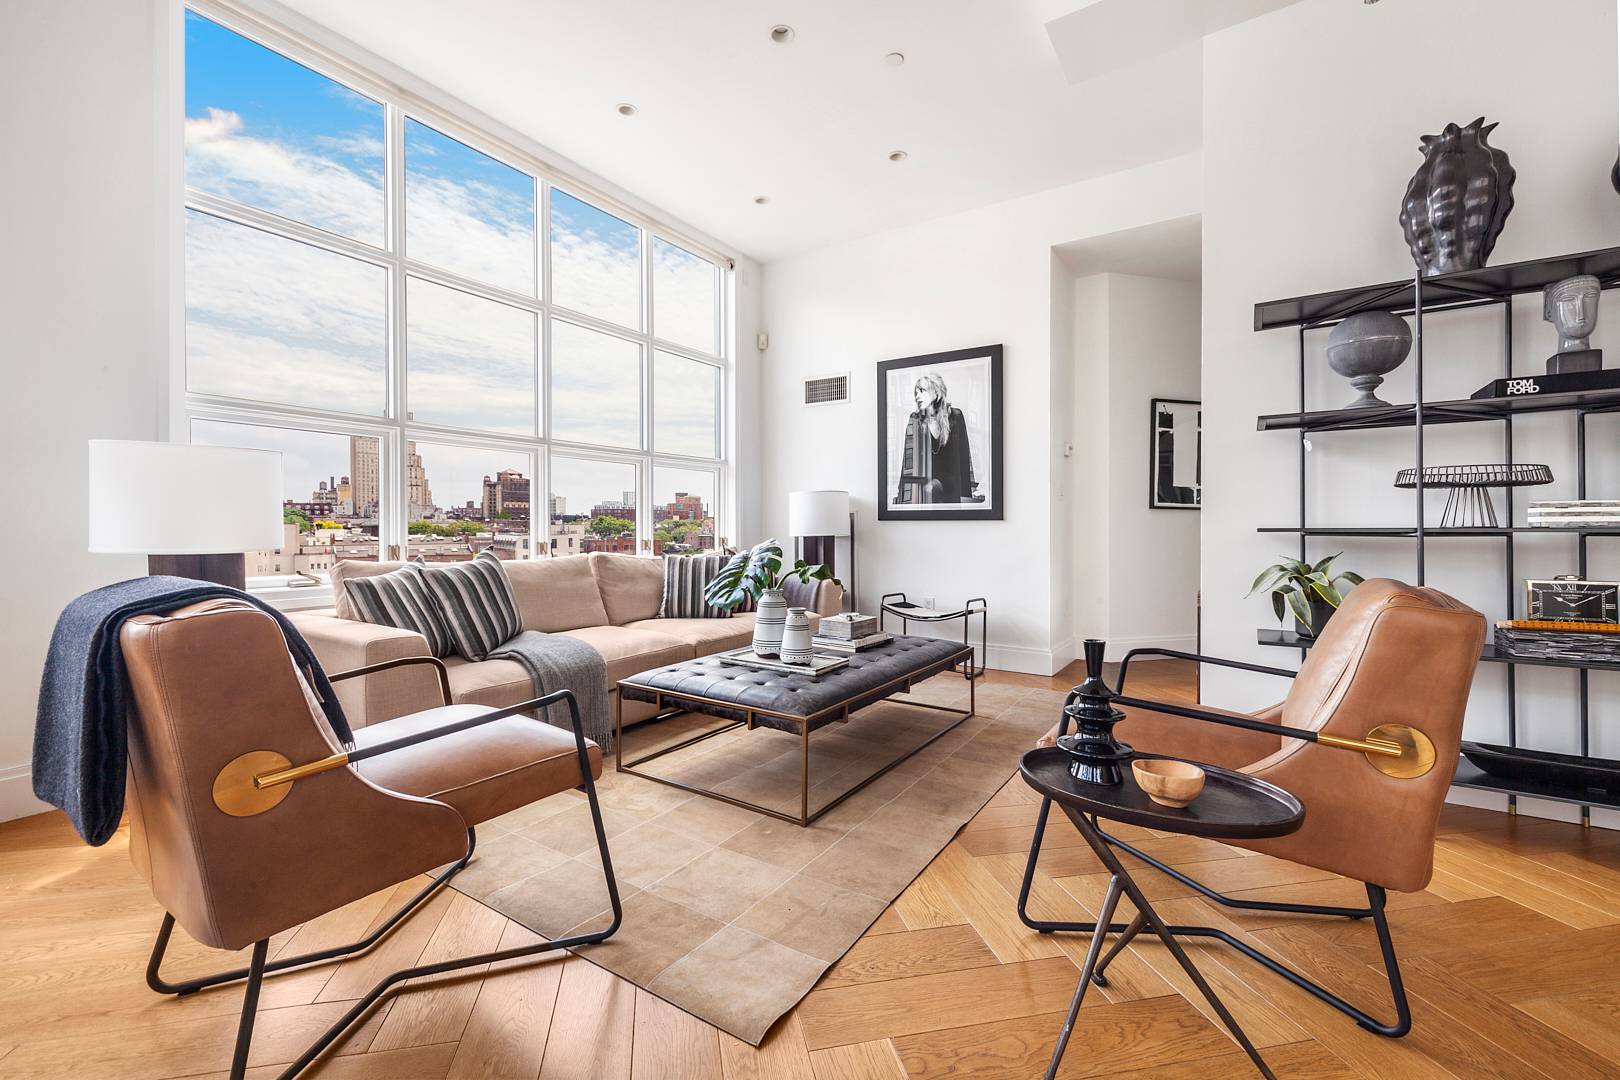 ALL OPEN HOUSES AND SHOWINGS ARE BY APPOINTMENT ONLY Enjoy DUMBO penthouse splendor in this spectacular full floor three bedroom, two bathroom condominium showplace with a private rooftop terrace.